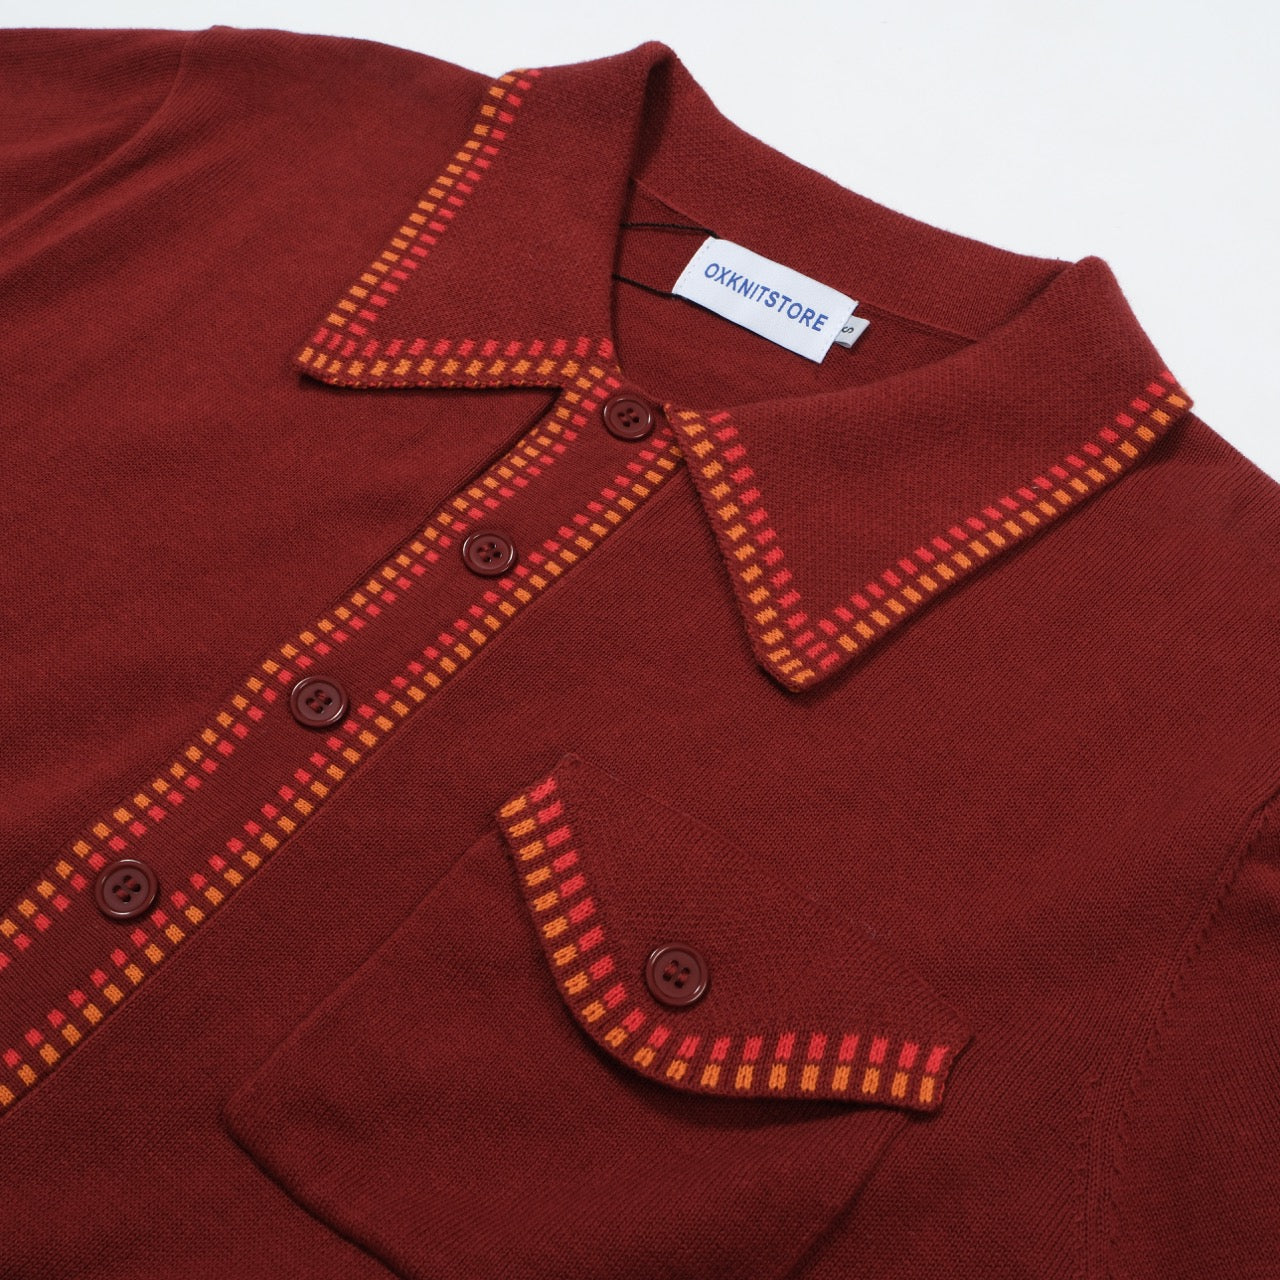 OXKNIT Men Vintage Clothing Casual 1960s Mod Style Red Knit Retro Polo